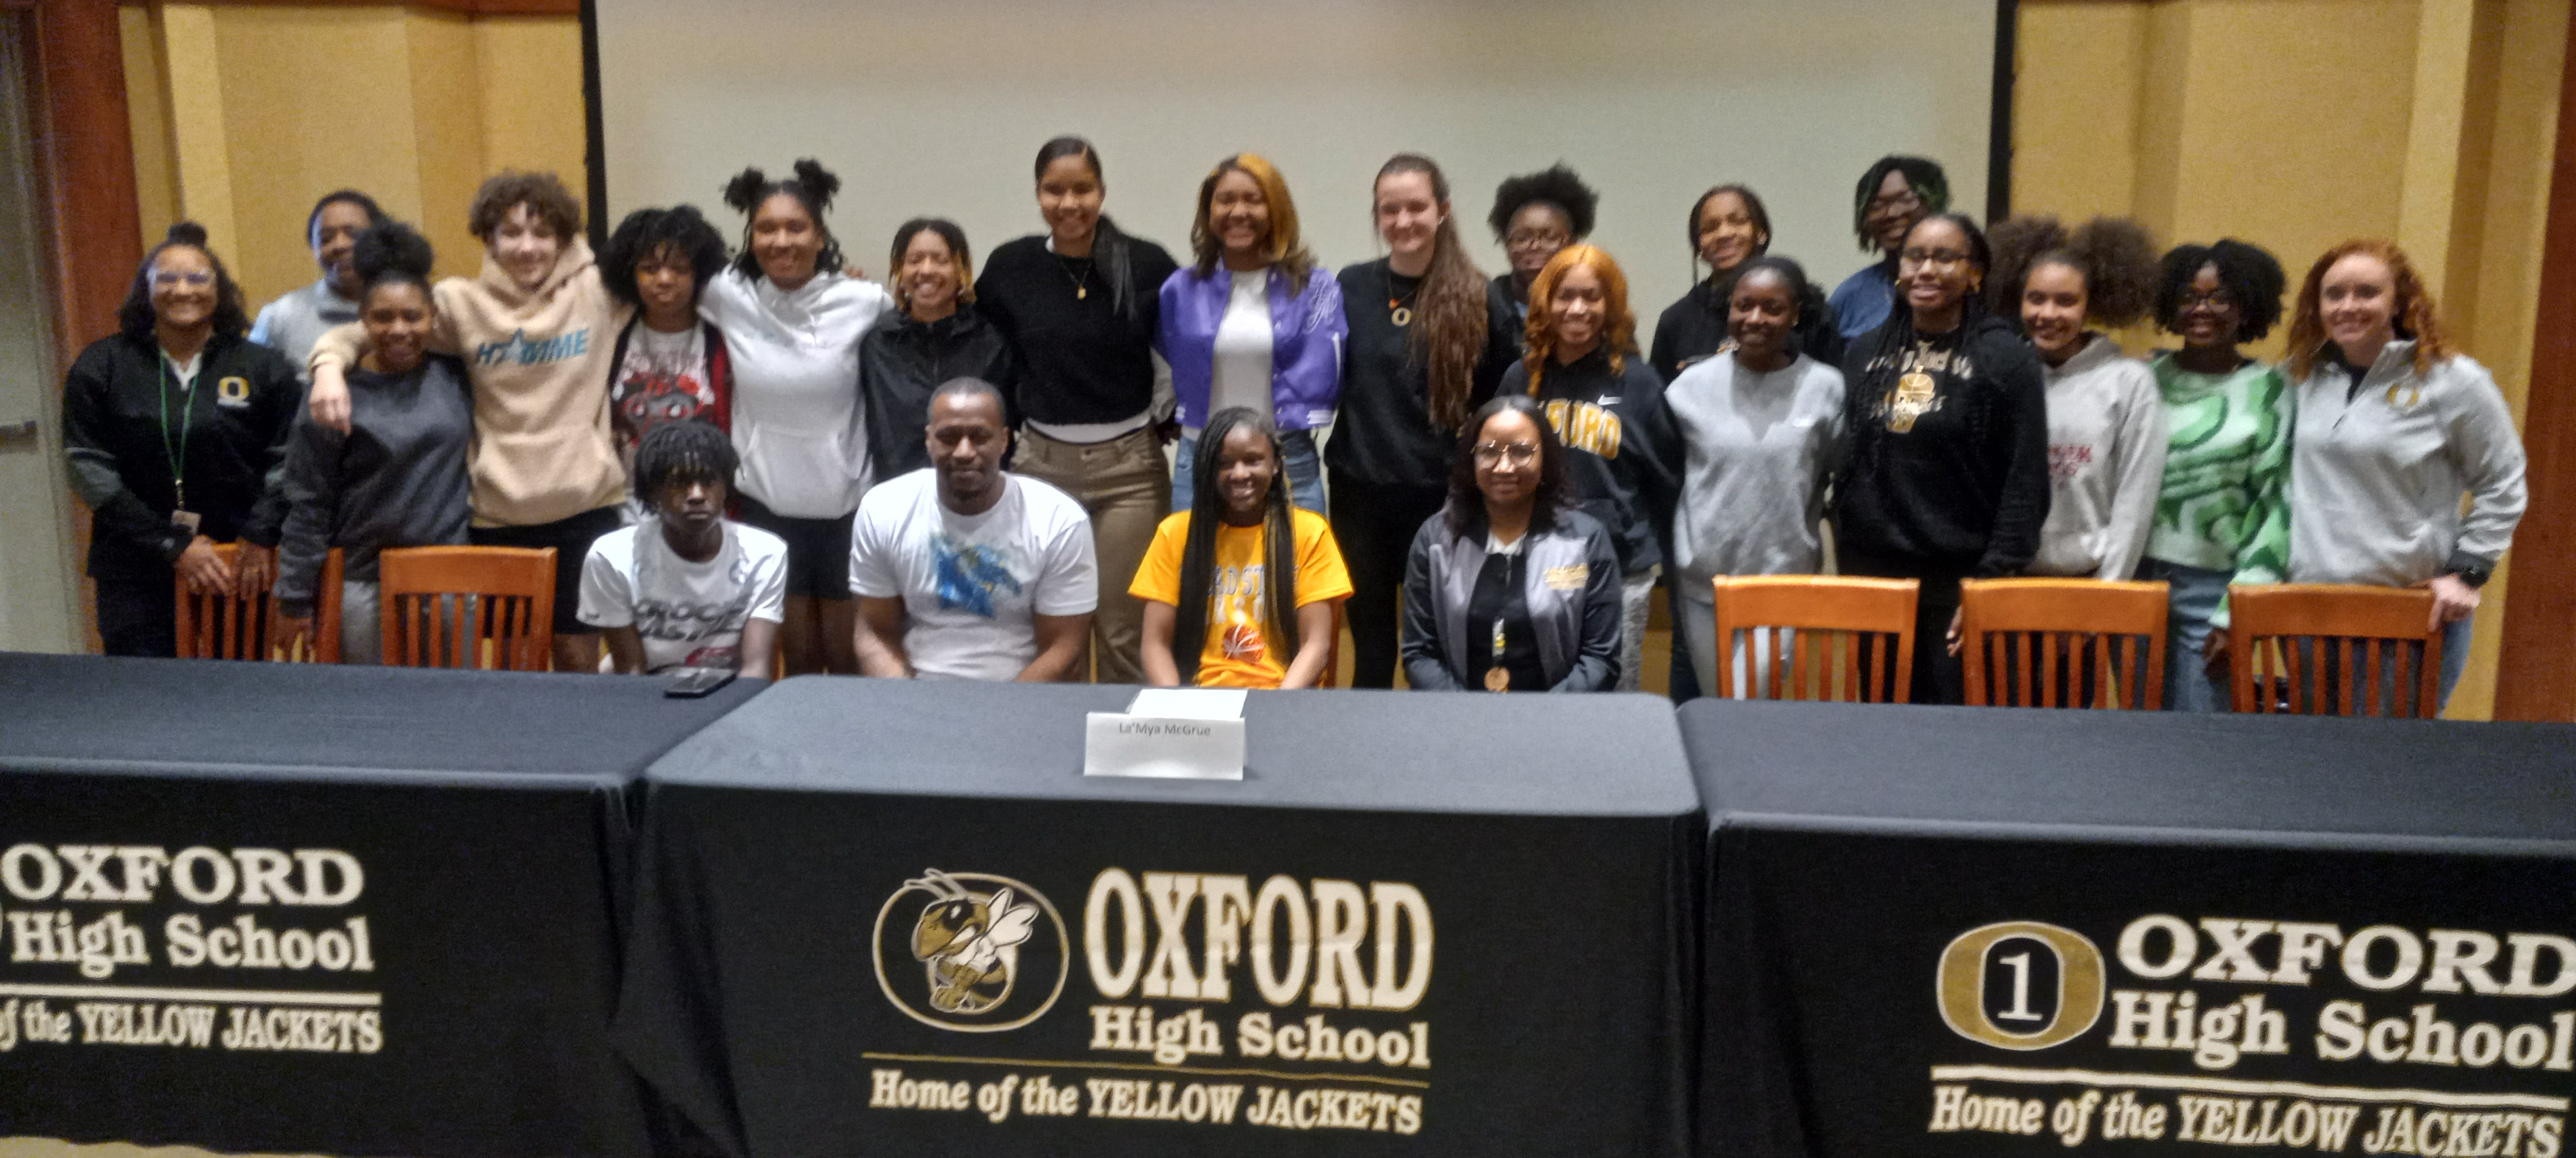 Oxford’s La’Mya McGrue (bottom, center) and family members pose with teammates and coaches at a celebration of her signing to play for Snead State Community College. To her left is her mom, Shavon Wysinger, also an Oxford assistant coach. (Photo by Joe Medley)